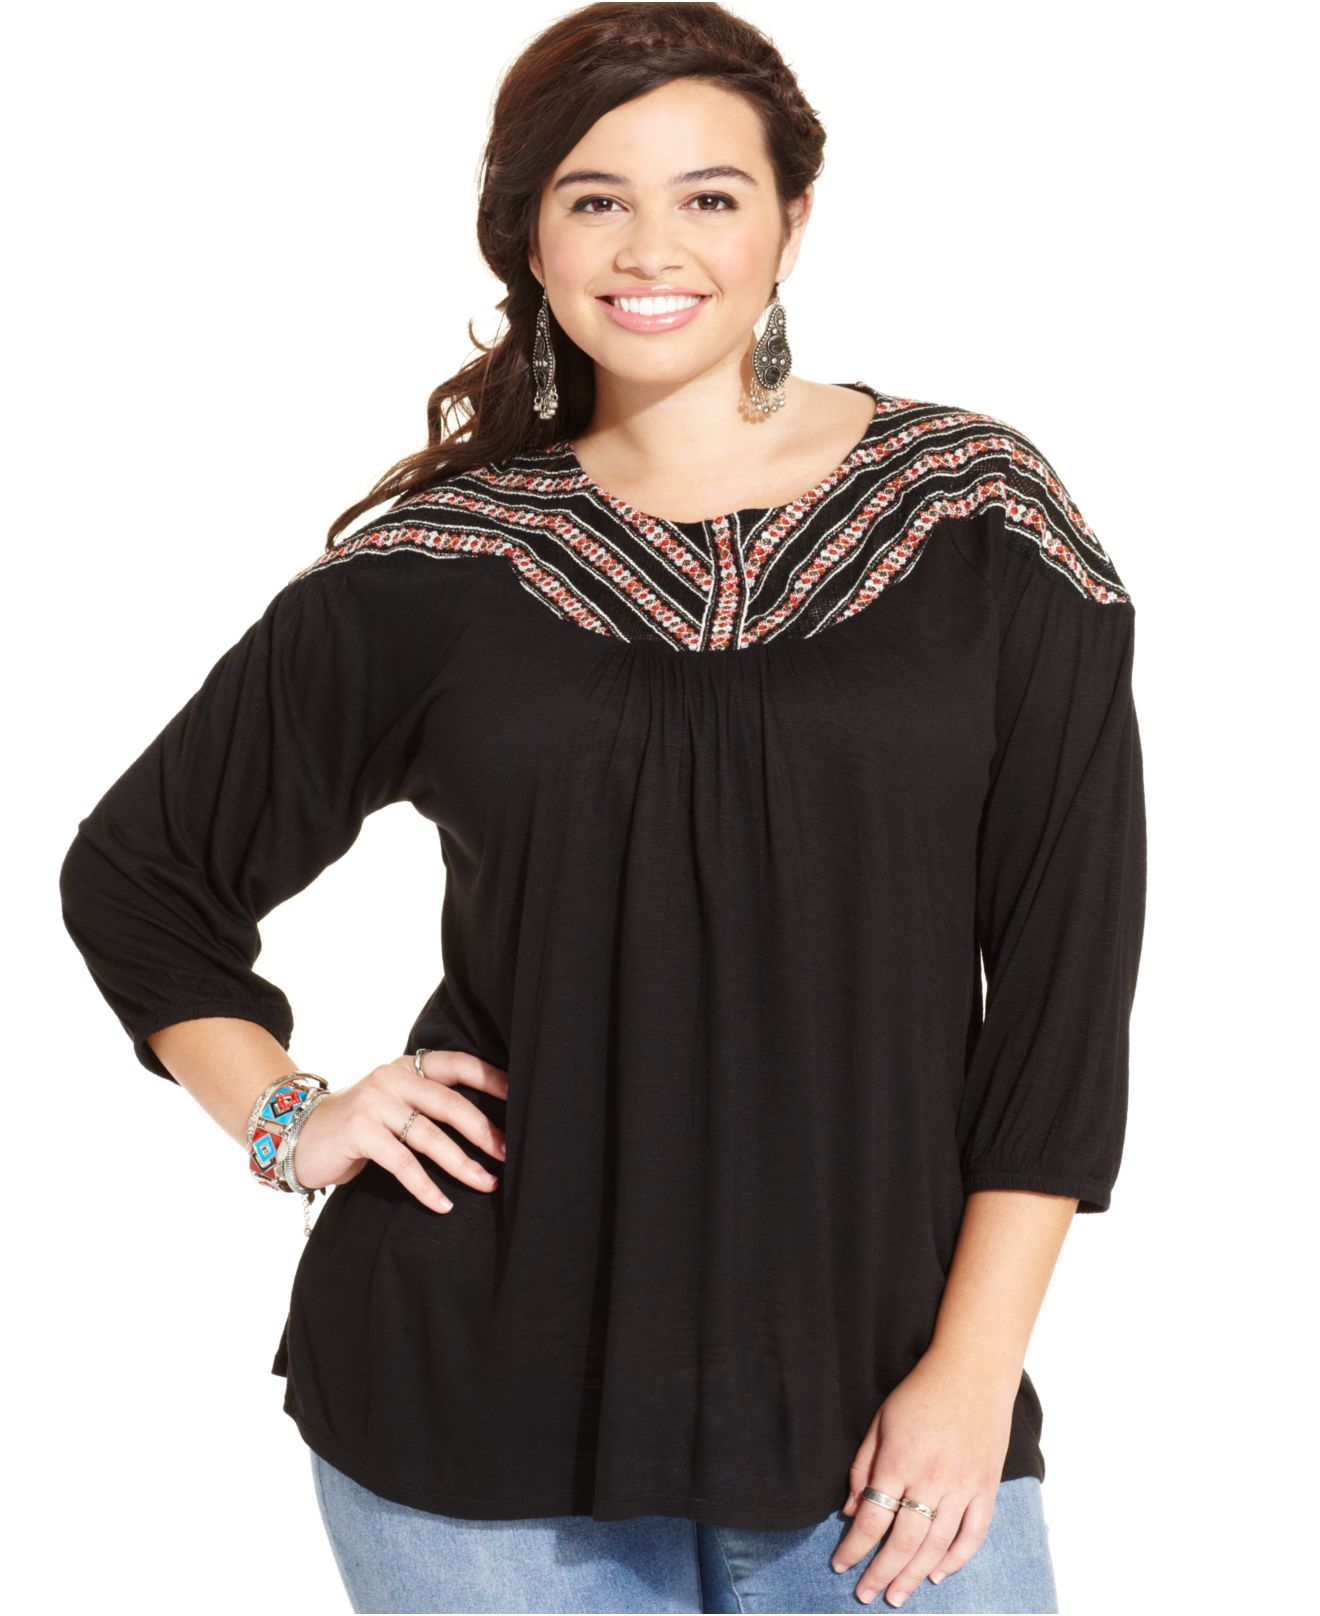 Lyst - Lucky Brand Lucky Brand Plus Size Embroidered Peasant Top in Black